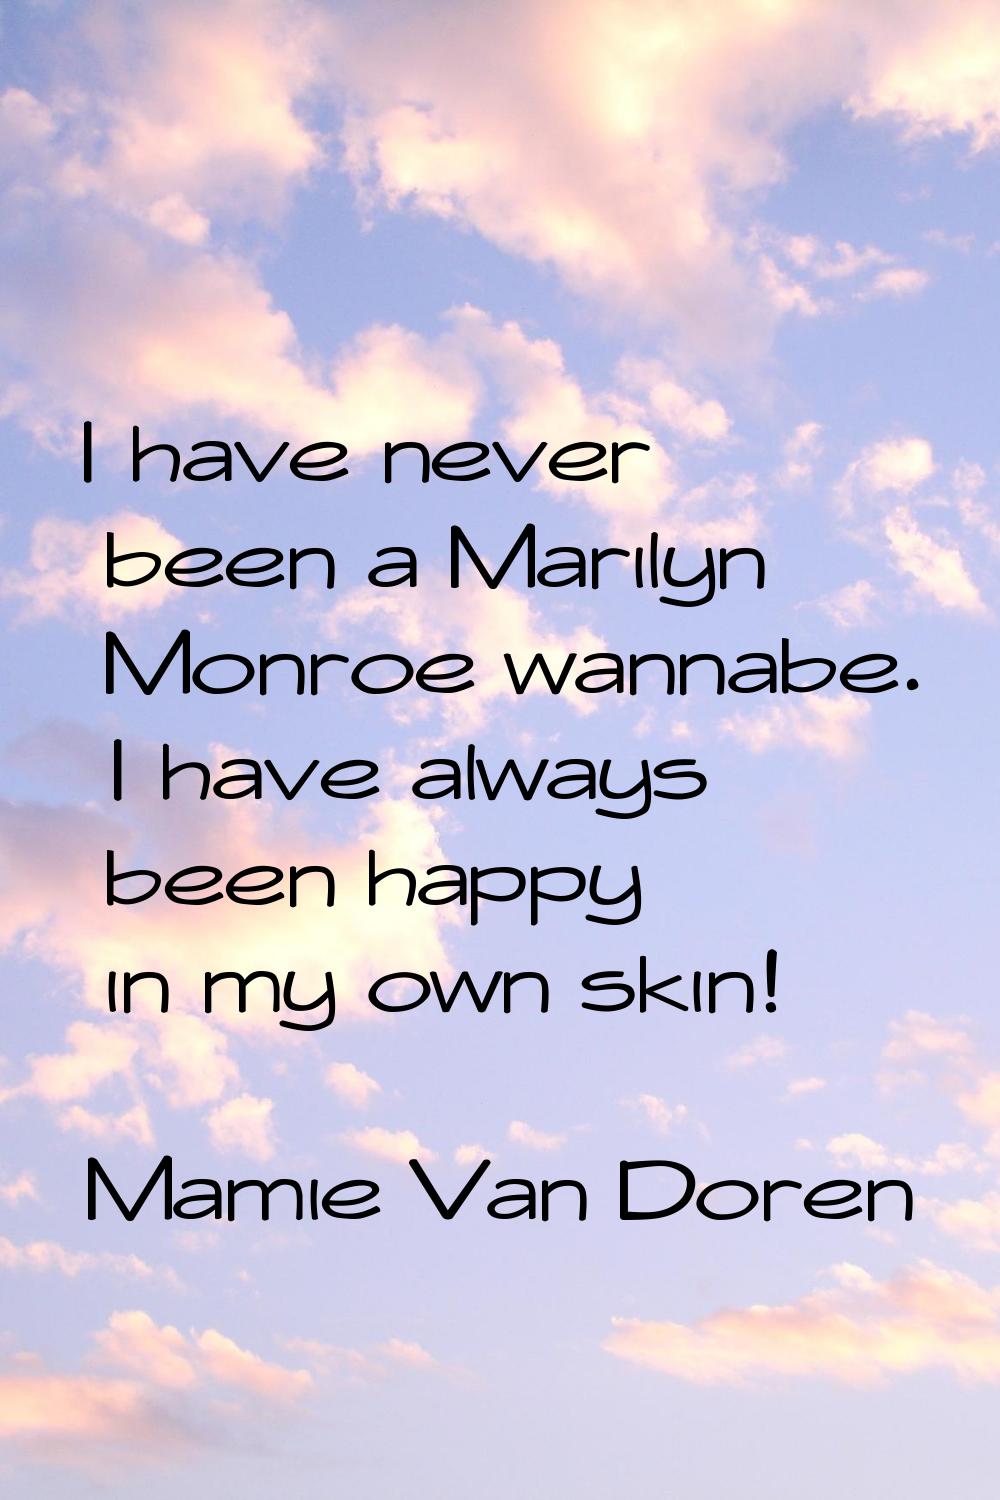 I have never been a Marilyn Monroe wannabe. I have always been happy in my own skin!